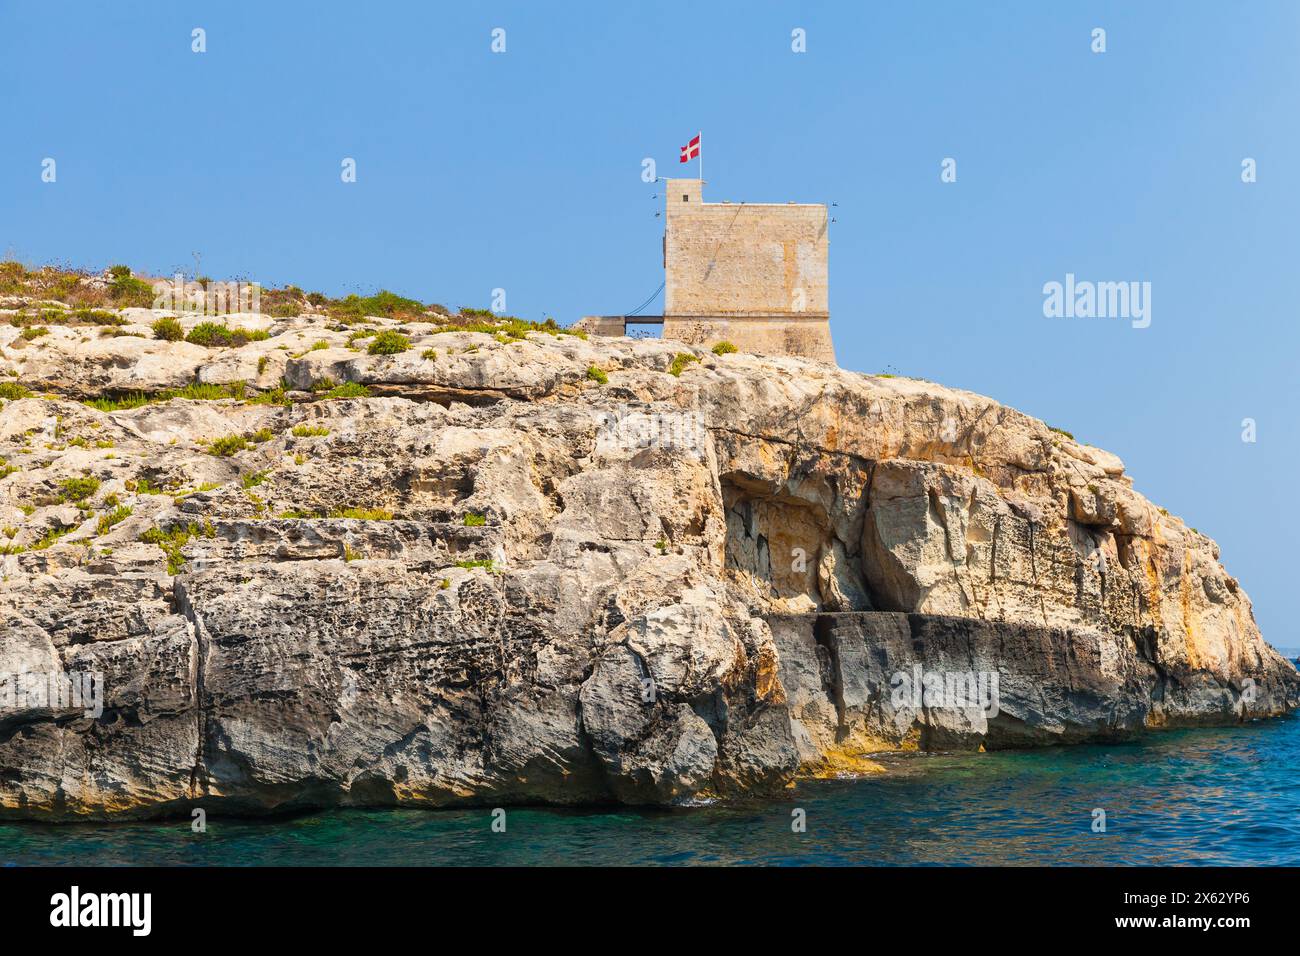 Seaside landscape with Mgarr ix-Xini Tower, the largest of the coastal watchtowers that the Knights of Malta erected on the island of Gozo Stock Photo